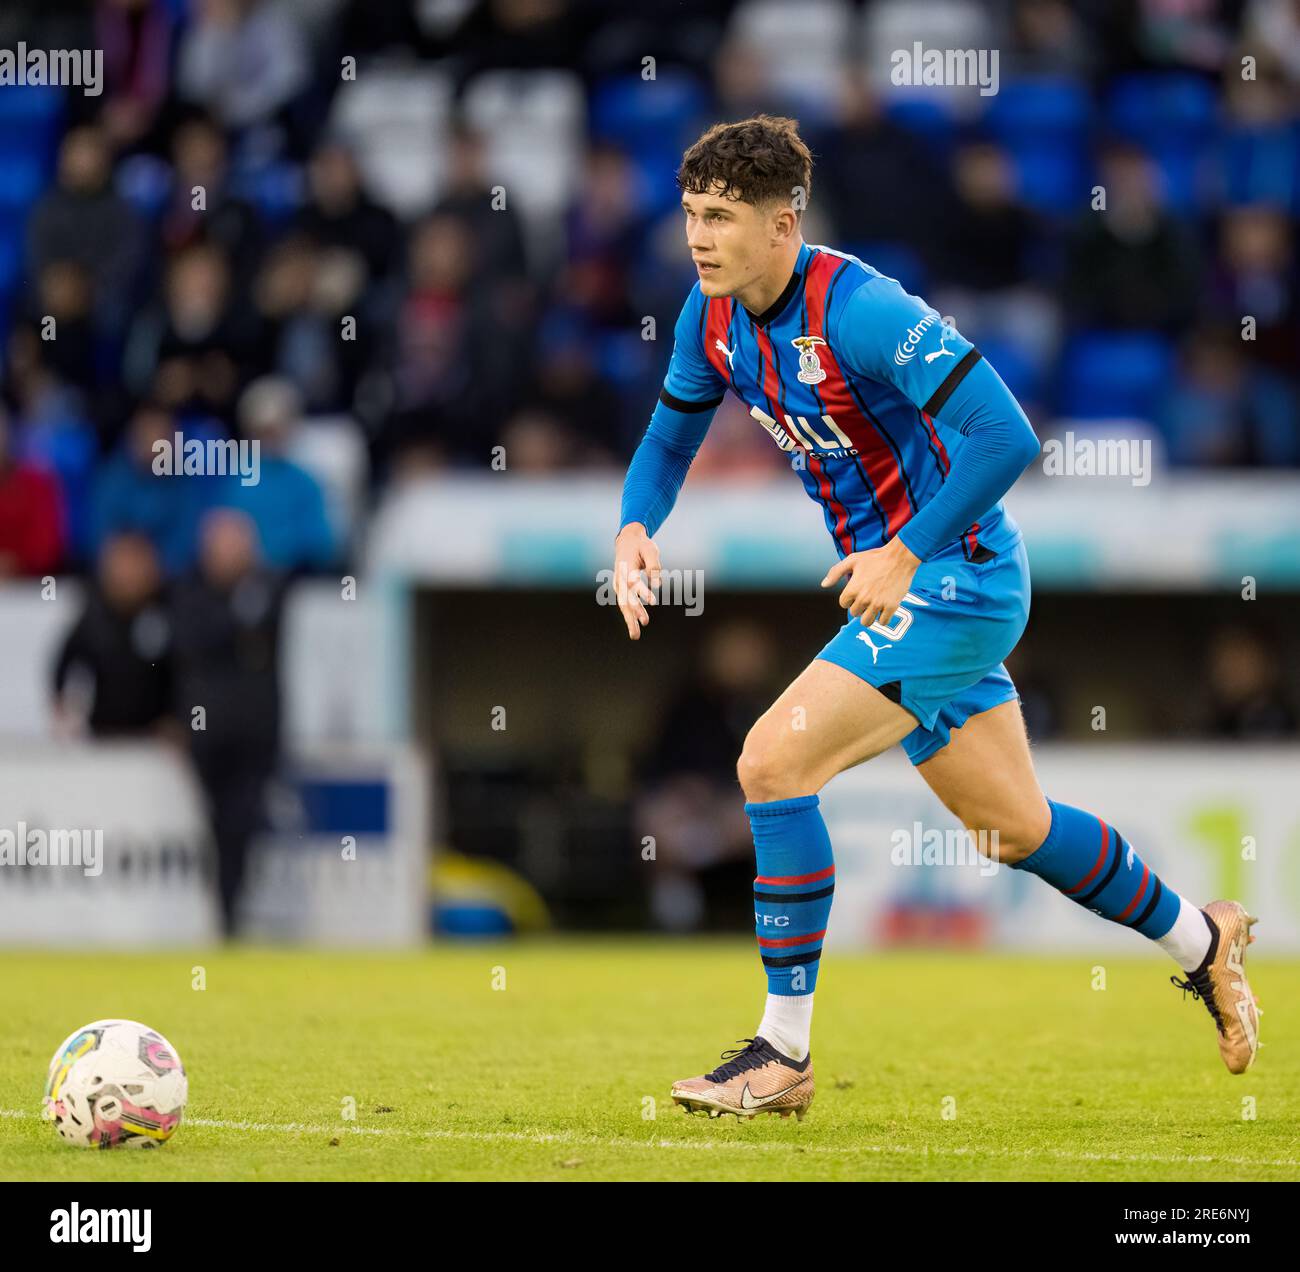 Caledonian Stadium, Inverness, UK. 25th July, 2023. This is from the Viaplay Cup tie between Inverness Caledonian Thistle FC (ICT) and Airdrieonians FC. PICTURE CONTENT:- ICT - Zak Delaney Credit: JASPERIMAGE/Alamy Live News Stock Photo